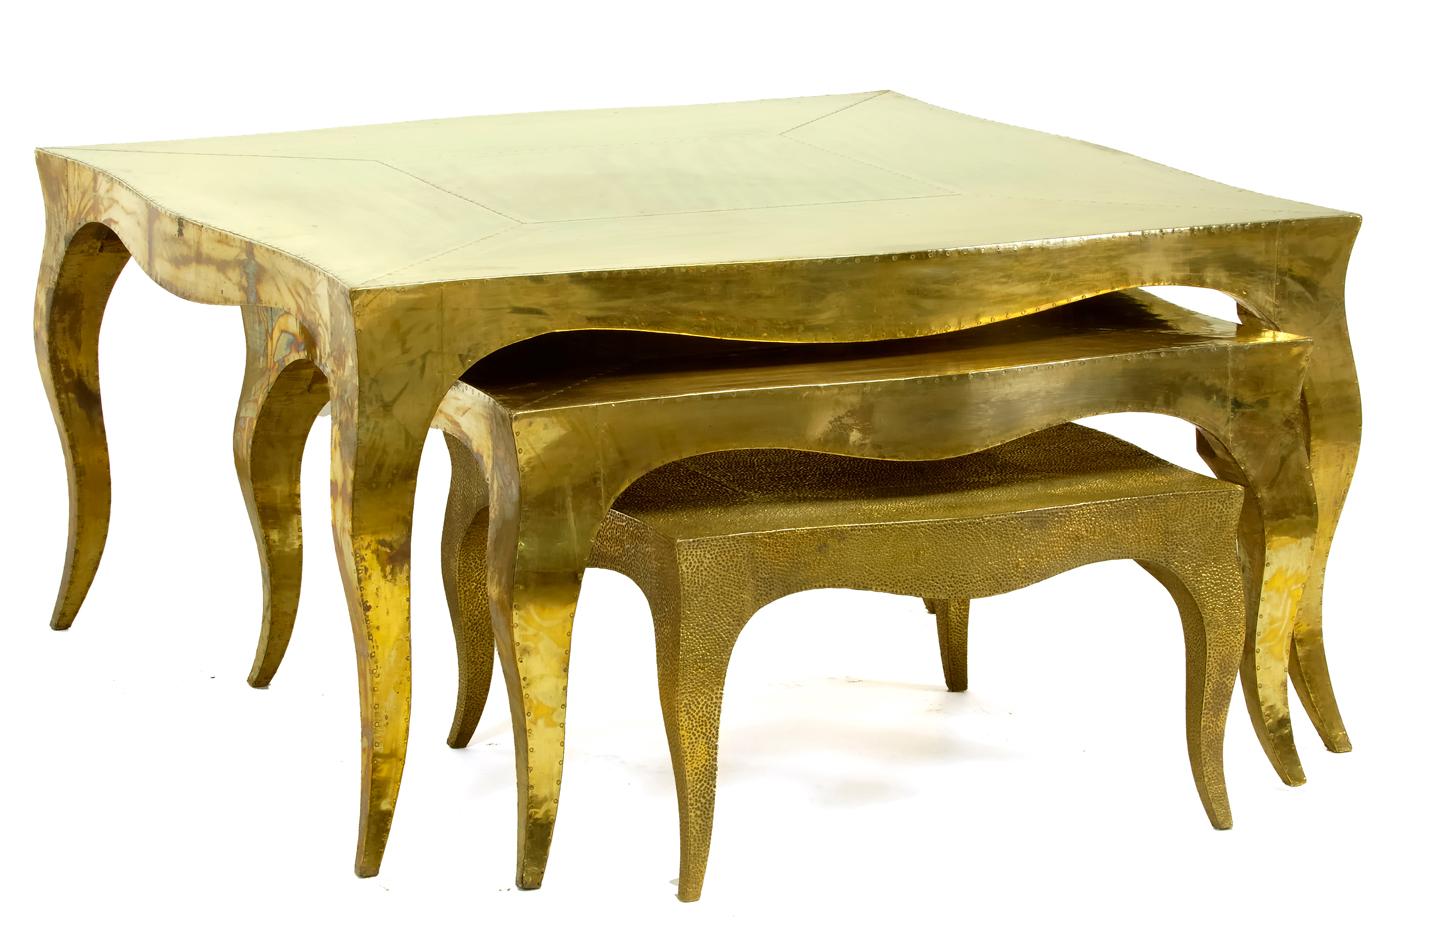 Louise Art Deco Industrial and Work Tables Mid. Hammered Copper by Paul Mathieu For Sale 2